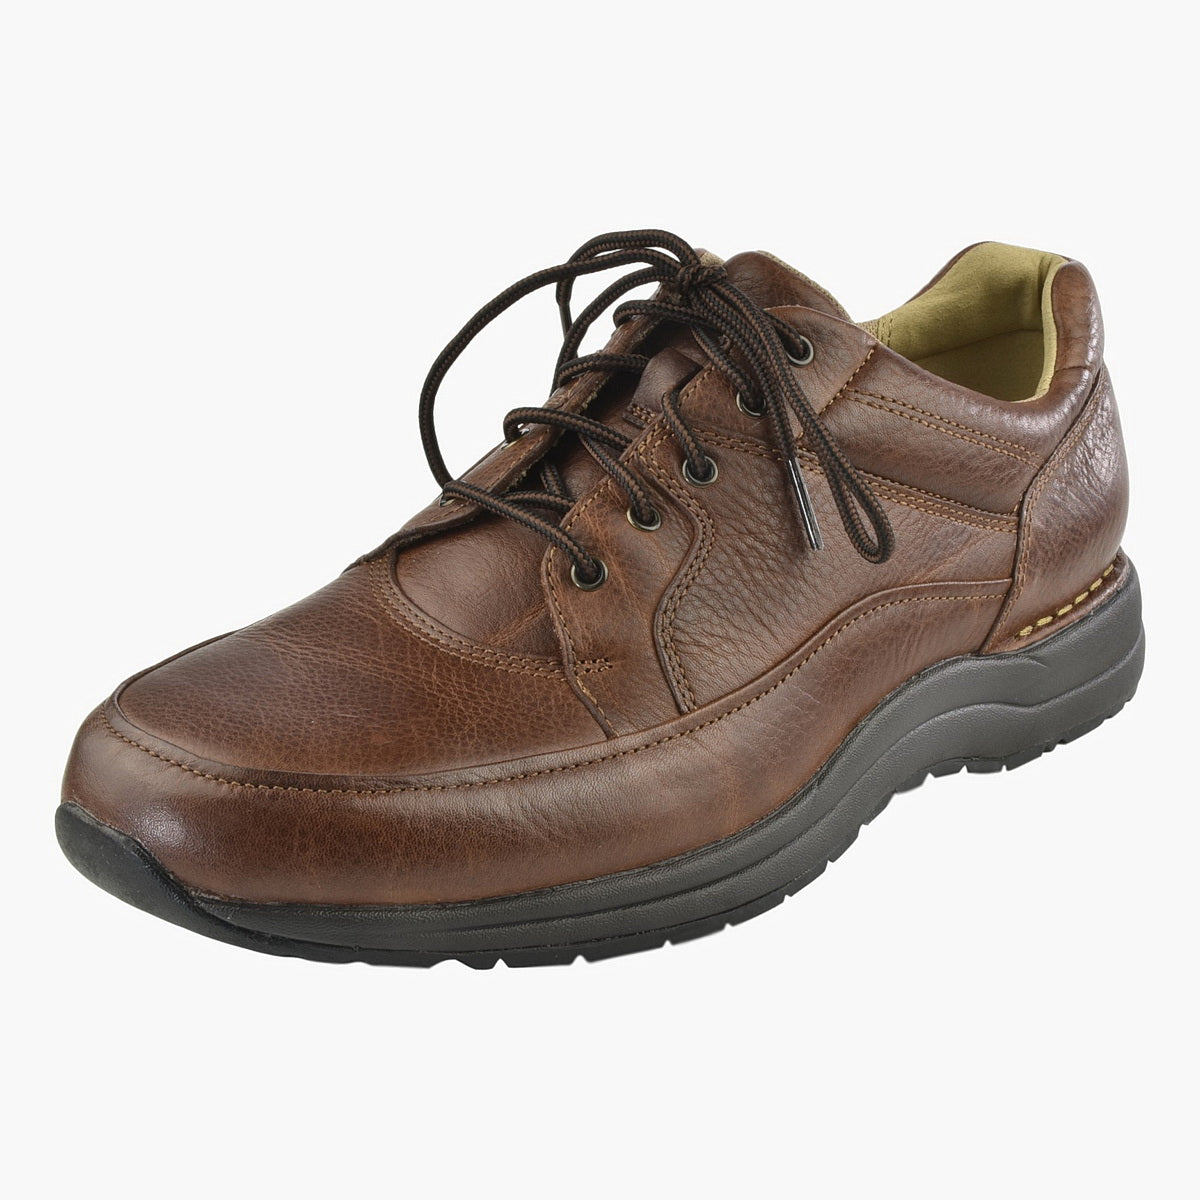 Rockport Edge Hill – Just Comfort Shoes